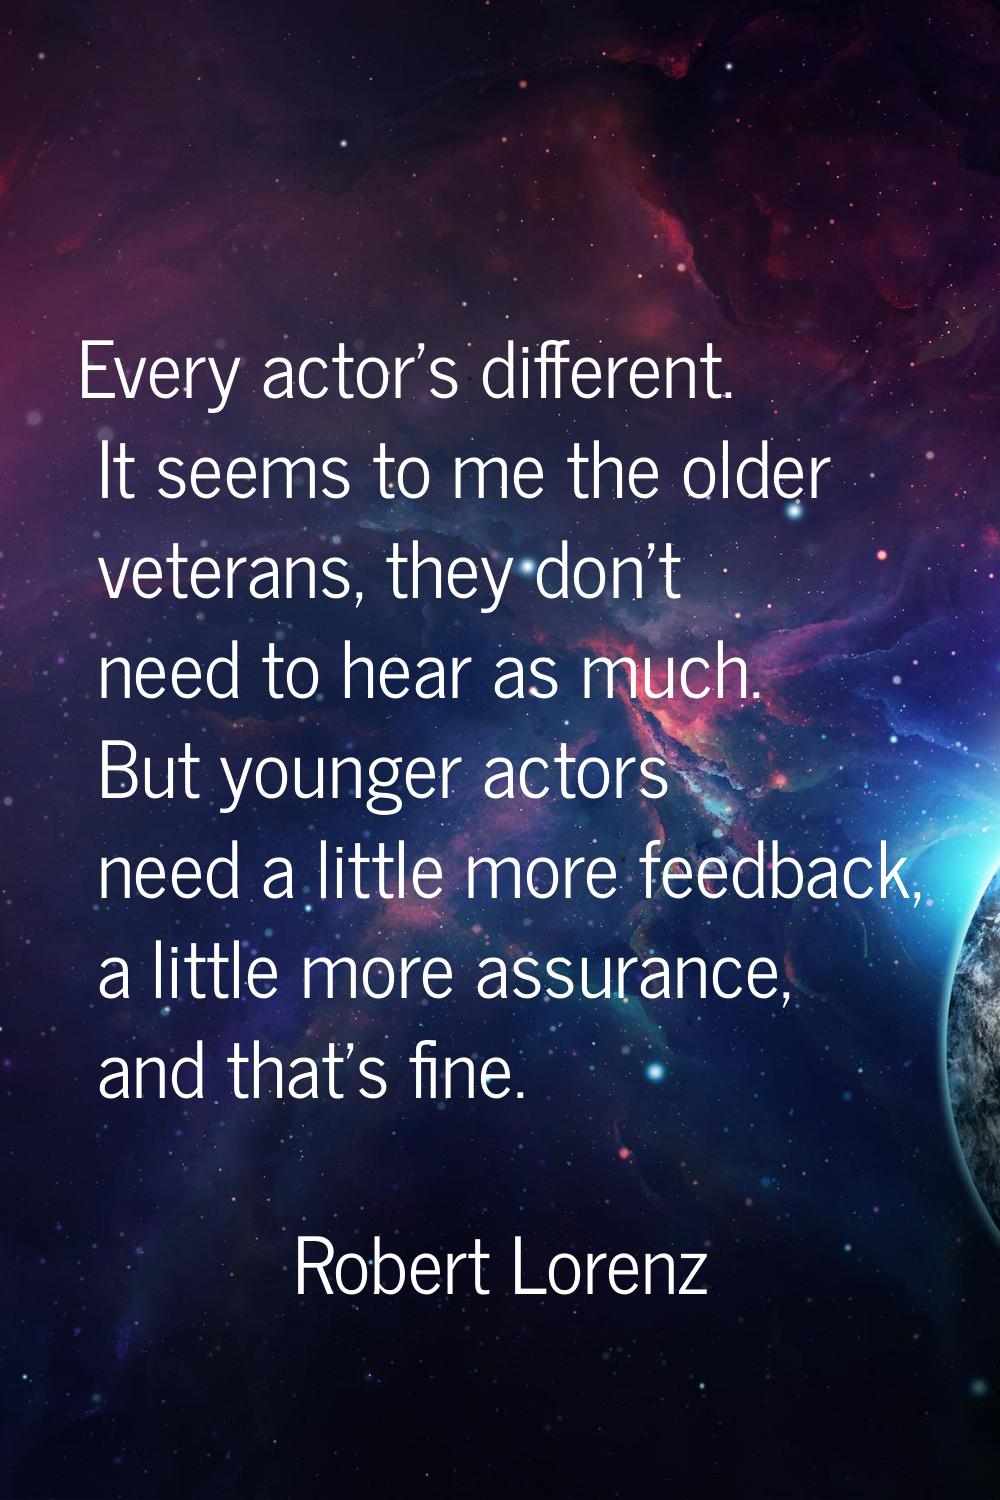 Every actor's different. It seems to me the older veterans, they don't need to hear as much. But yo